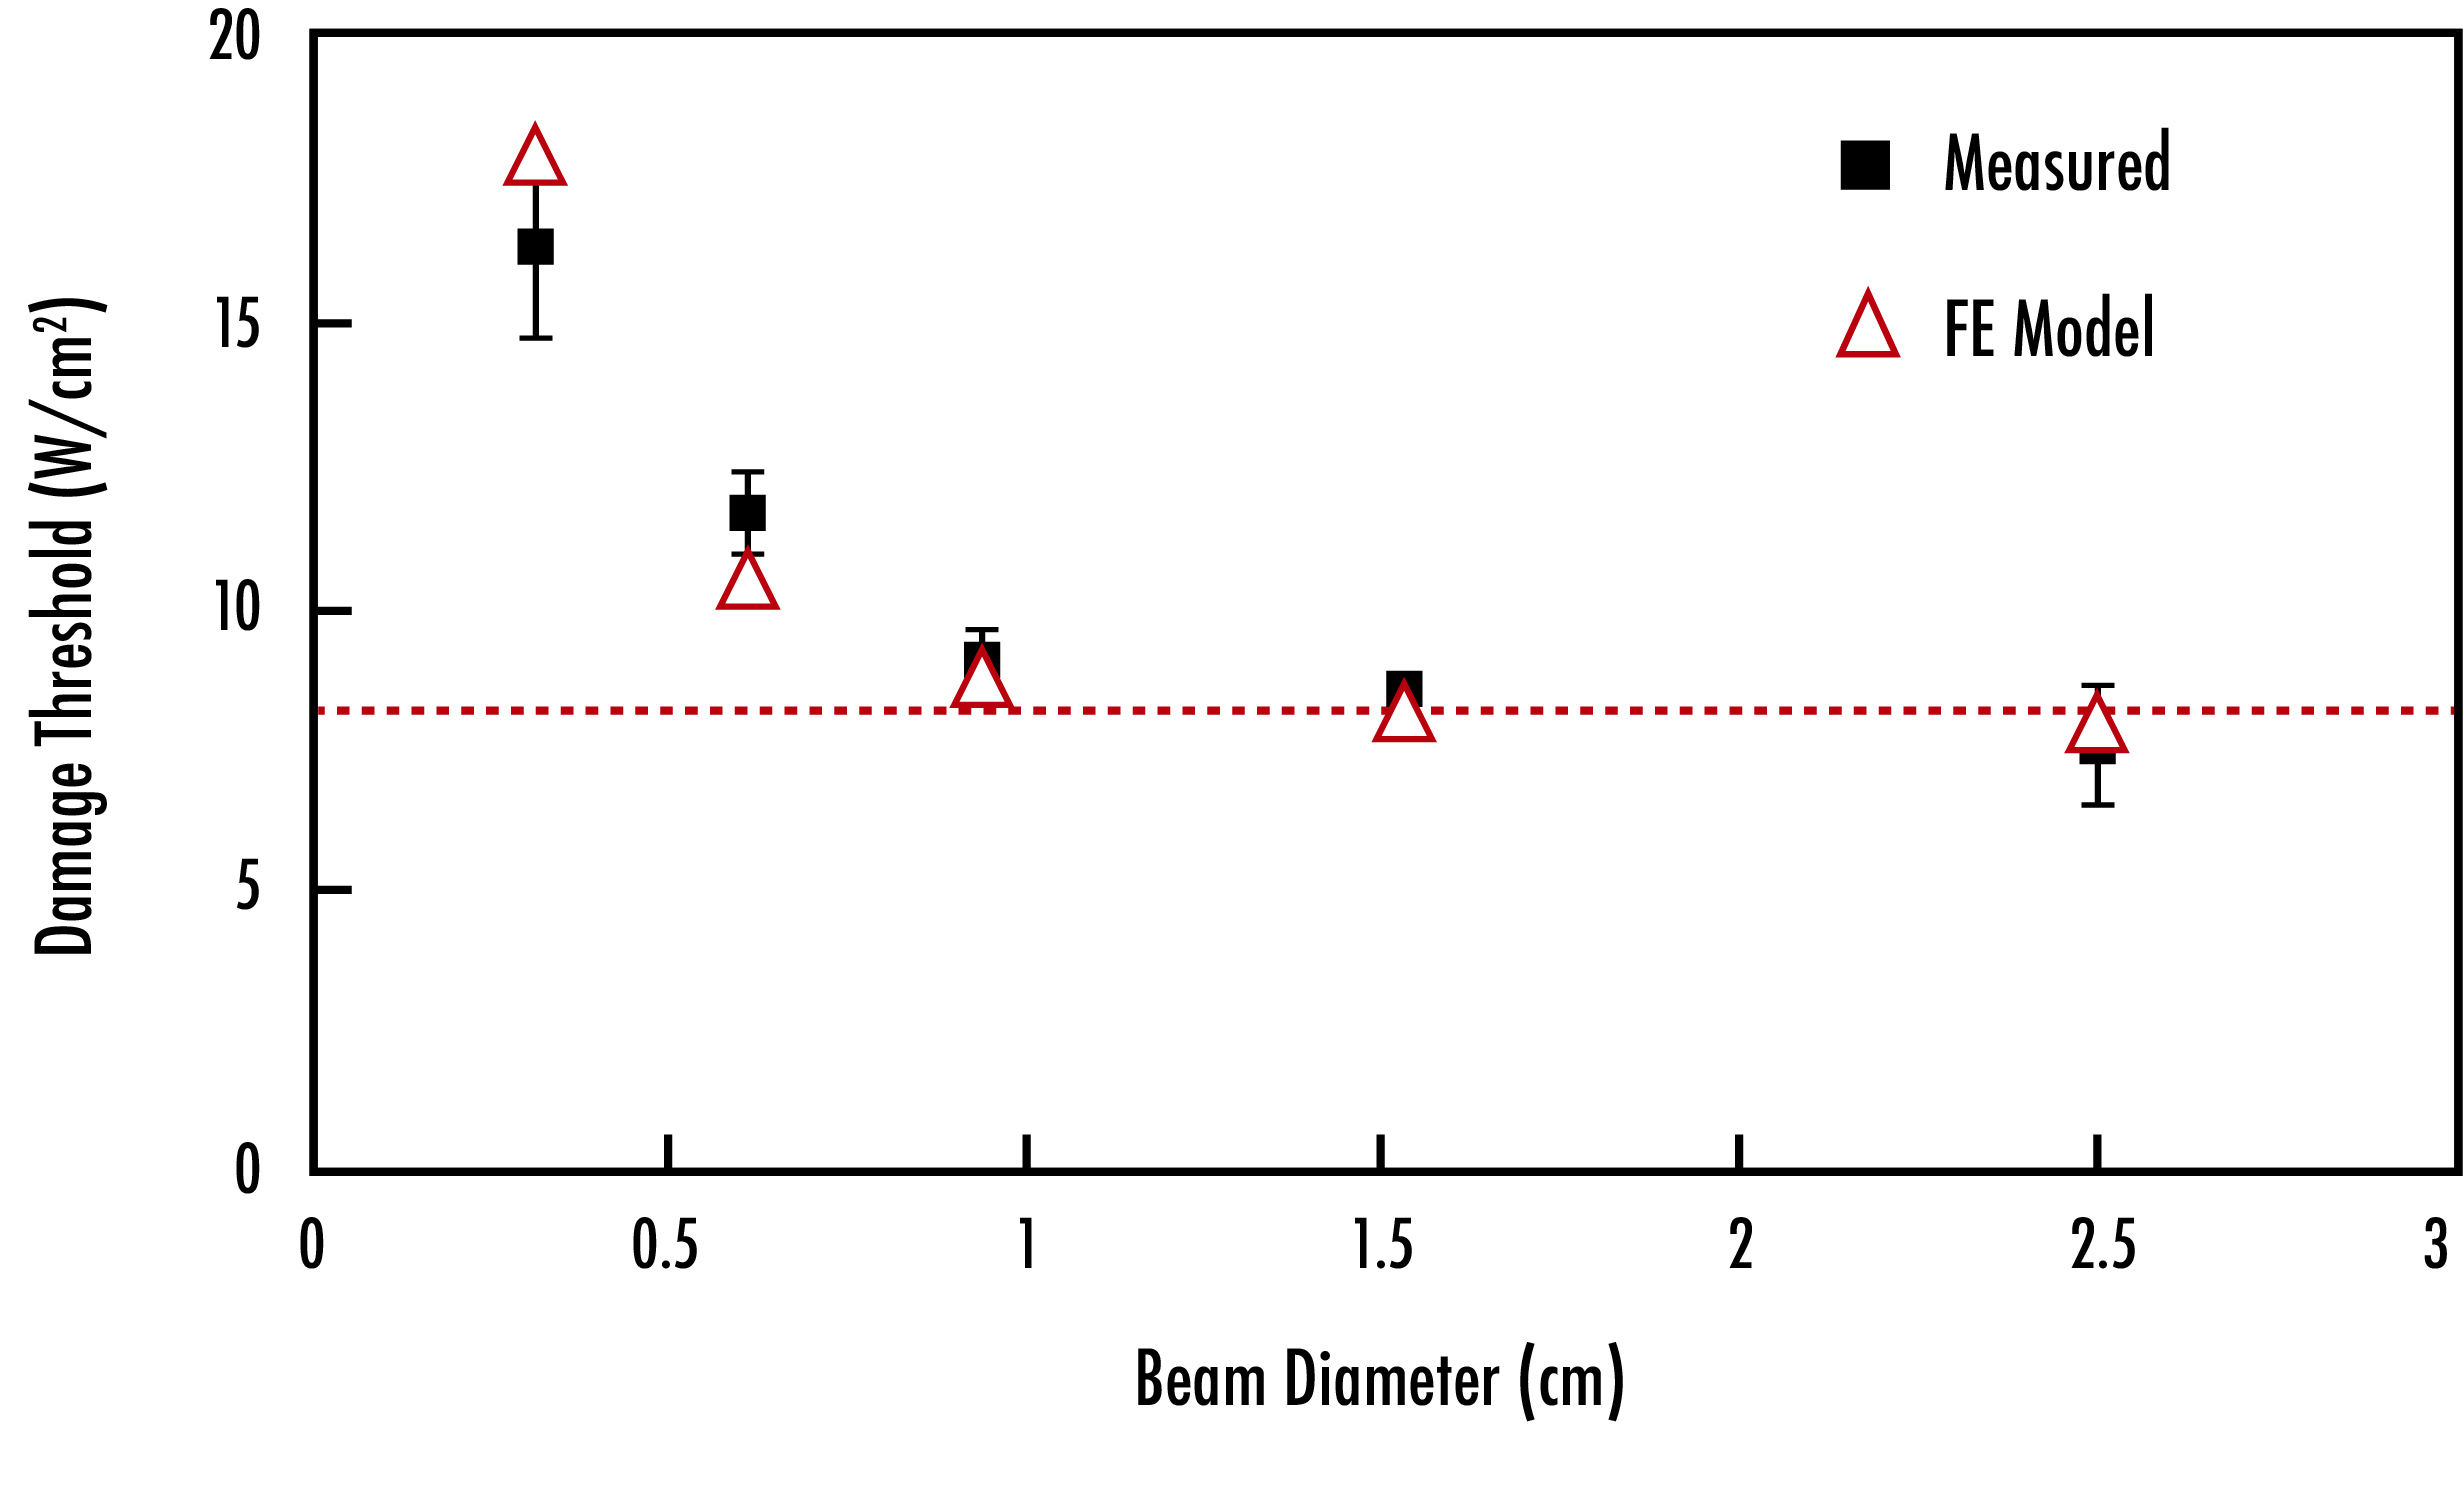 Damage threshold of samples exposed to quasi-CW and CW lasers decreases as beam diameter and exposure time increase.